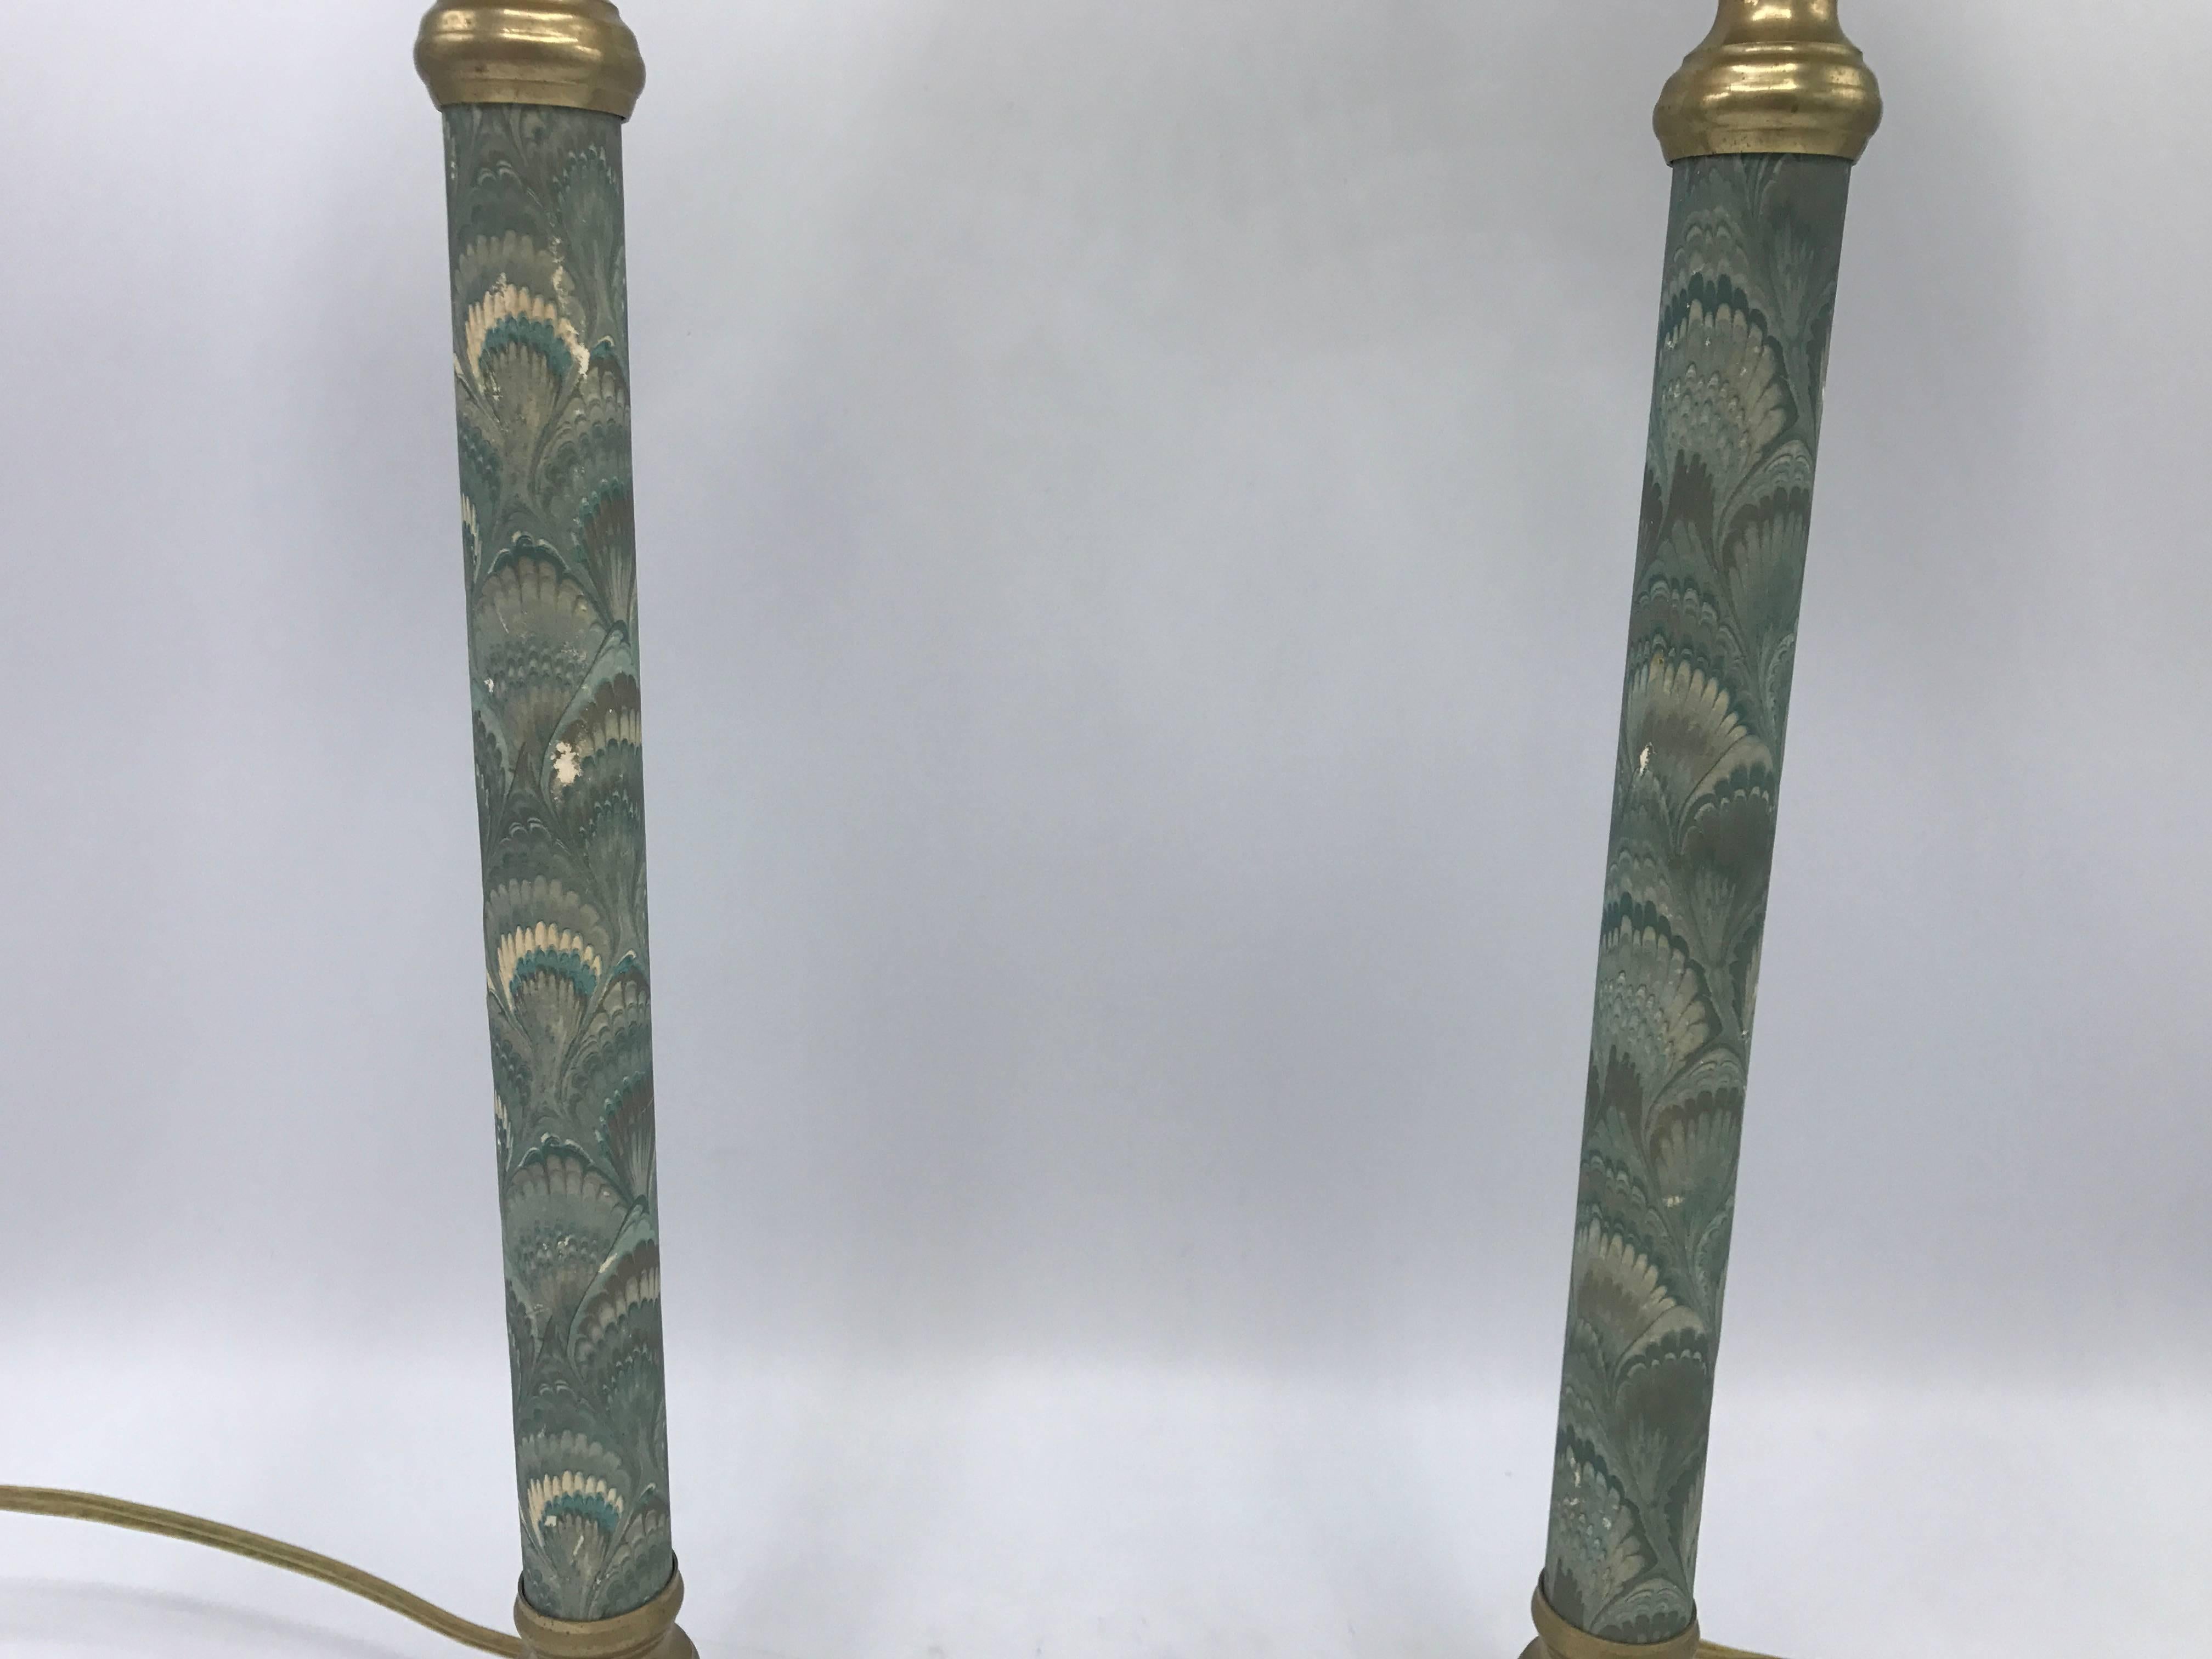 Brass 1950s Blue-Green Candlestick Lamps with Matching Water-Print Shades, Pair